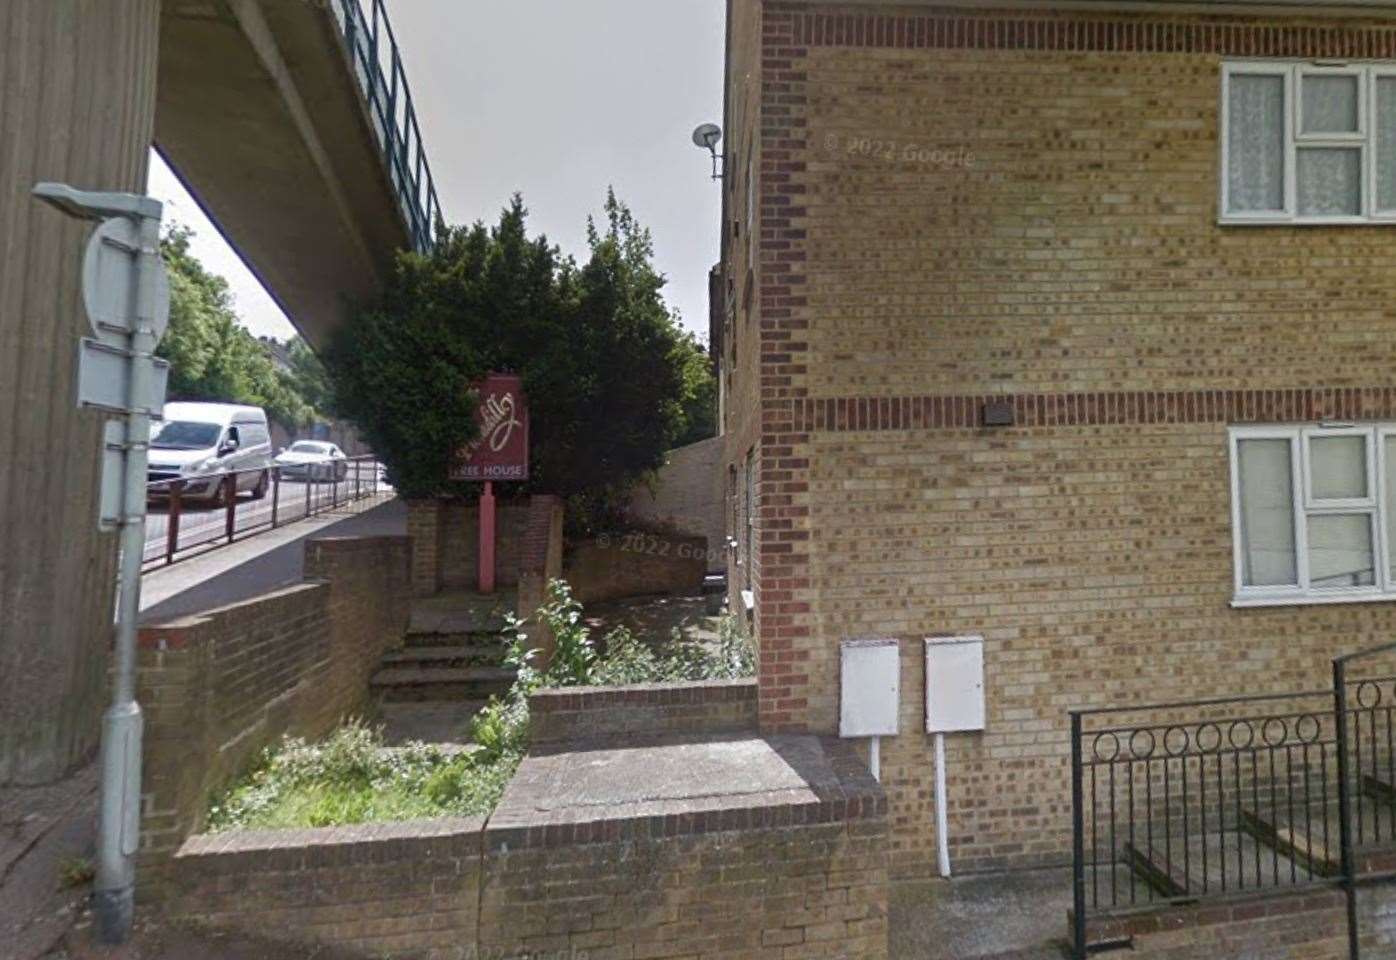 The pub sign still remains outside the new flats. Picture: Google Street View